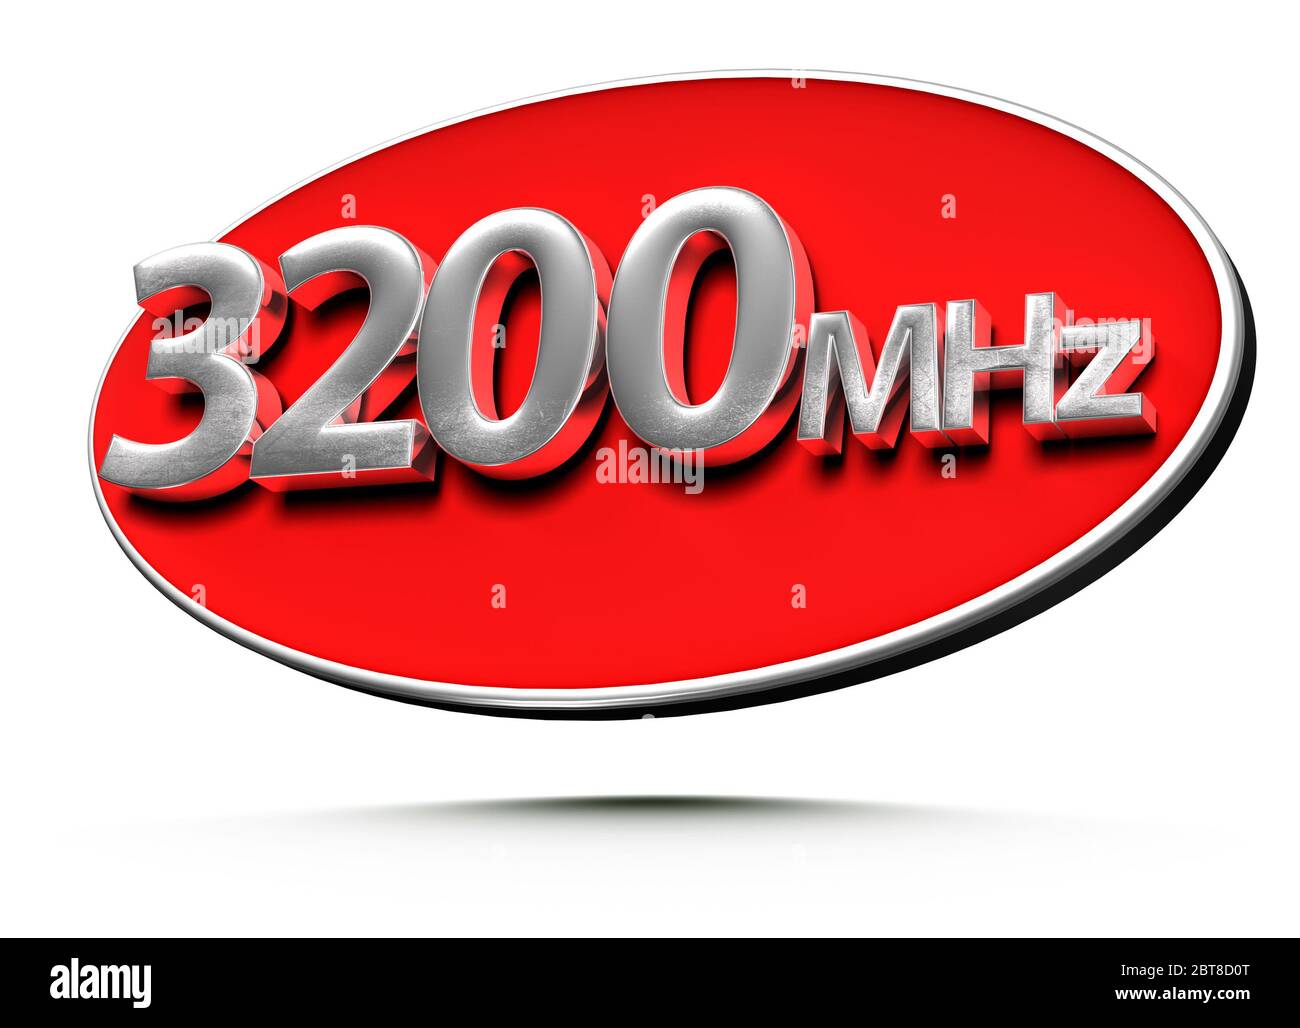 3D illustration 3200 MHz Stainless steel Ellipse red isolated on a white background.(with Clipping Path). Stock Photo